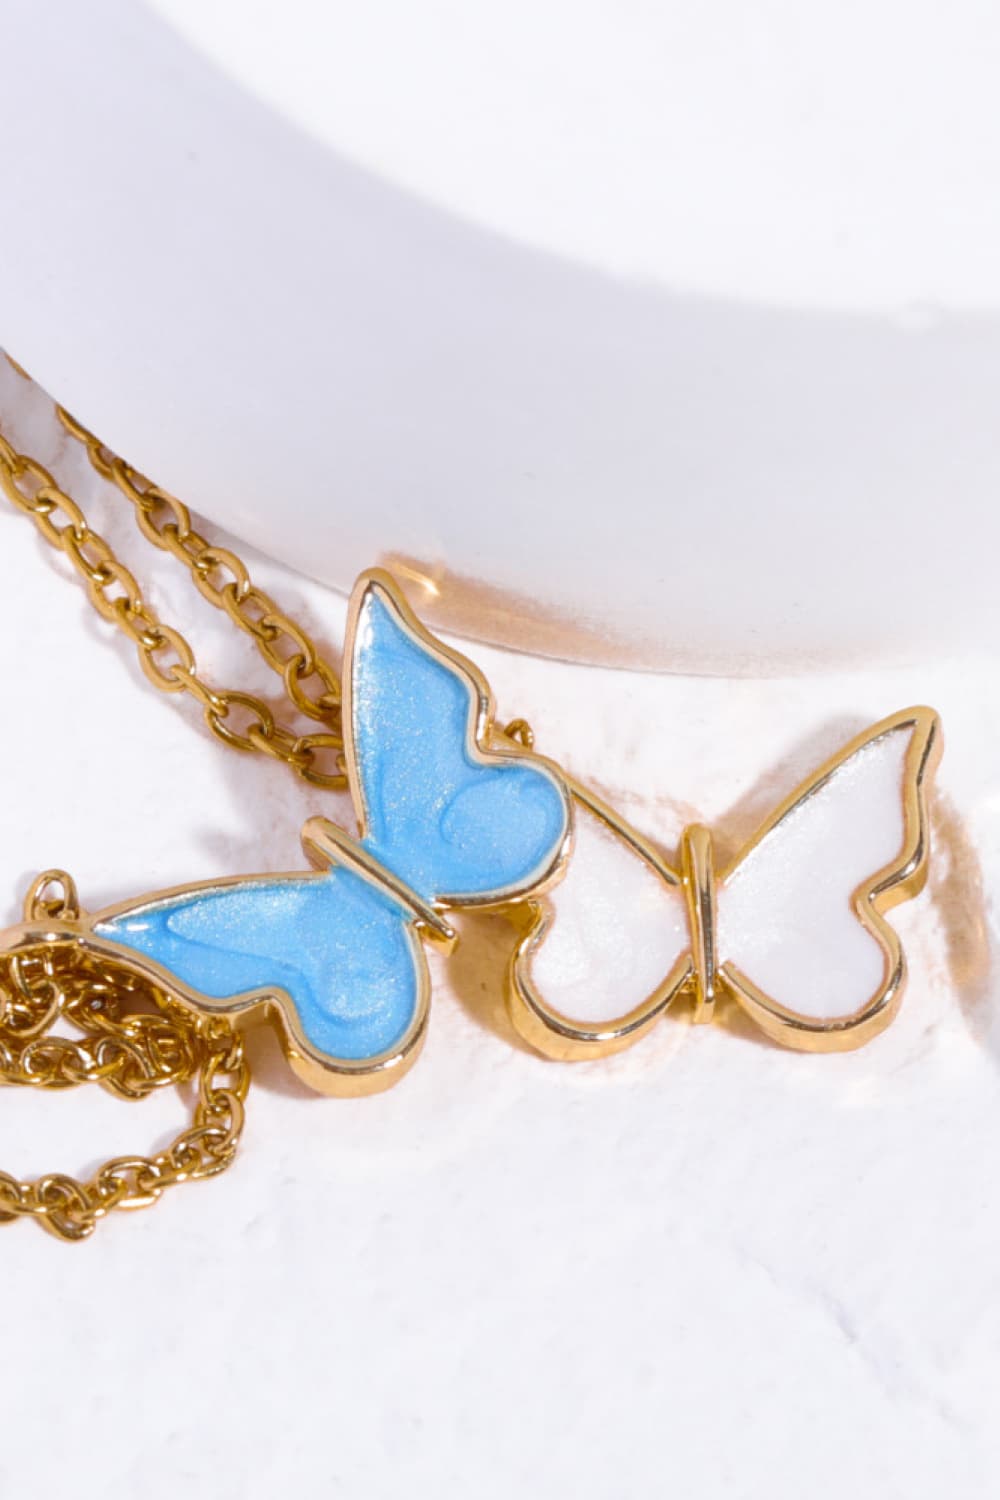 Trendsi Cupid Beauty Supplies Women Necklace Butterfly Pendant Copper 14K Gold-Plated Necklace